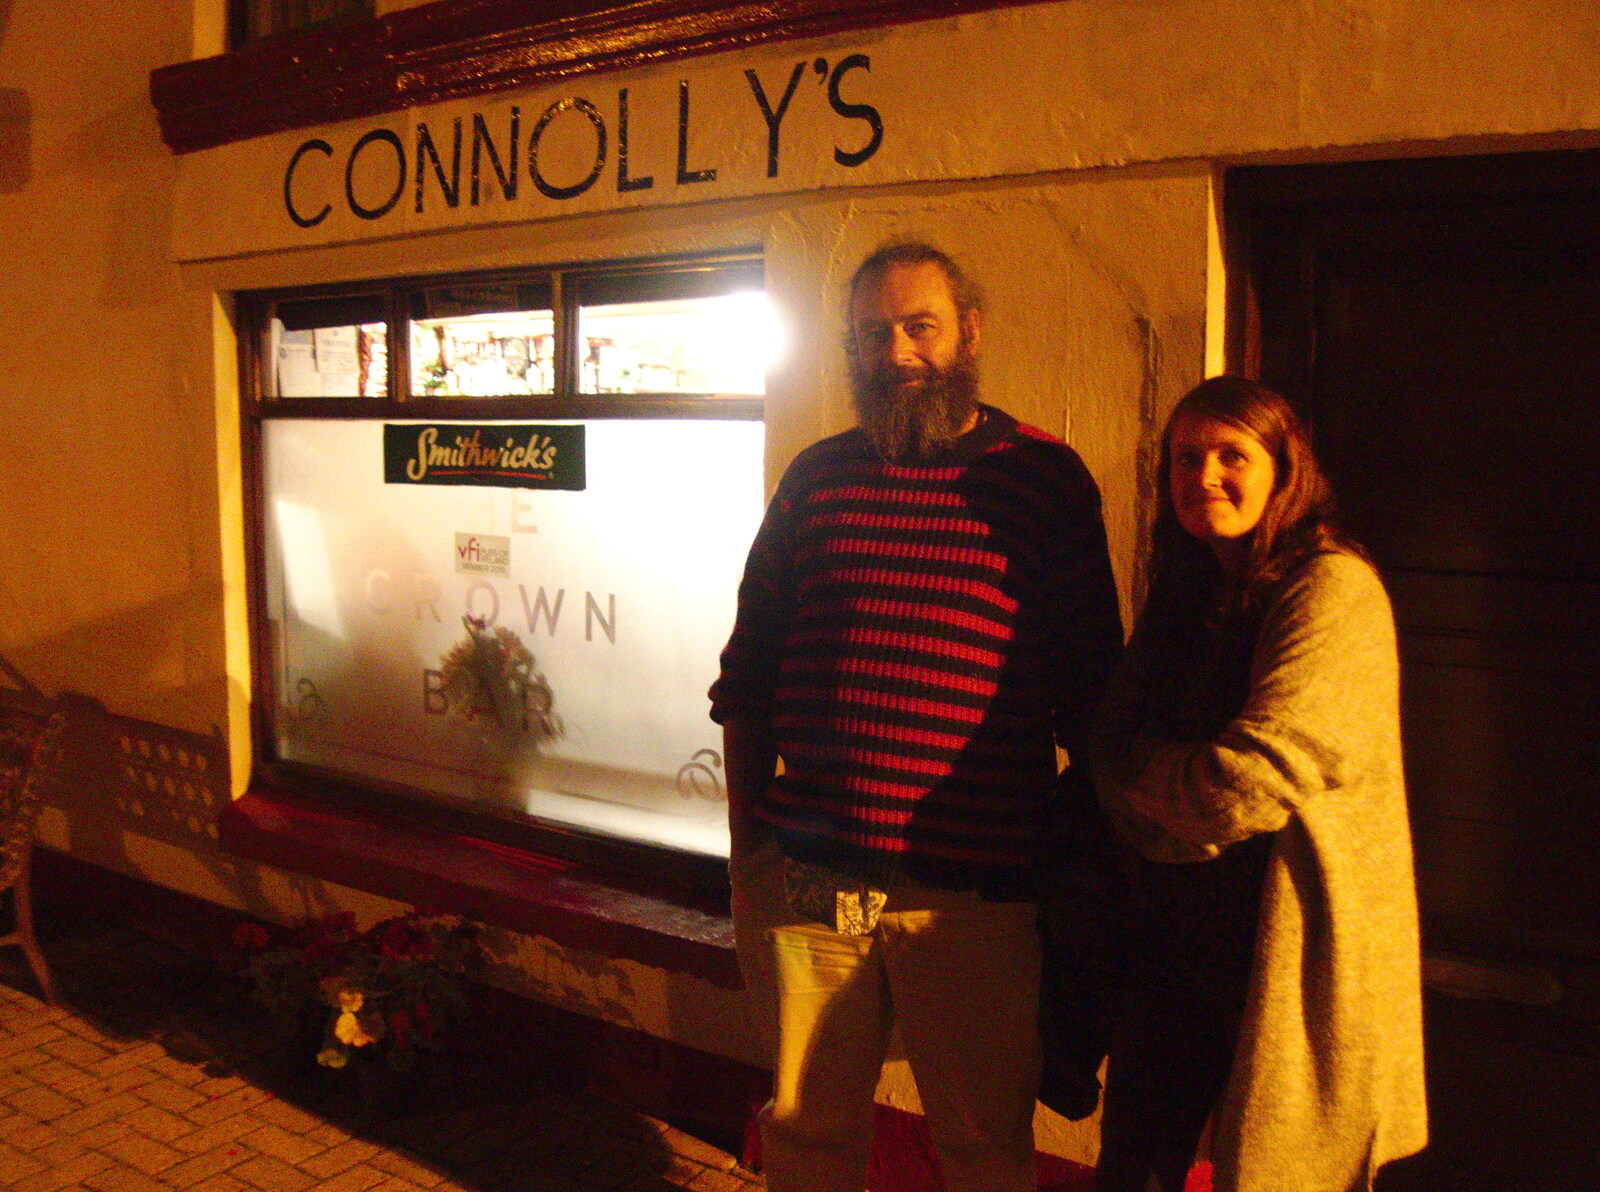 Outside the legend that is Connolly's from Florence Court and a Postcard from Sligo, Fermanagh and Sligo, Ireland - 21st August 2019